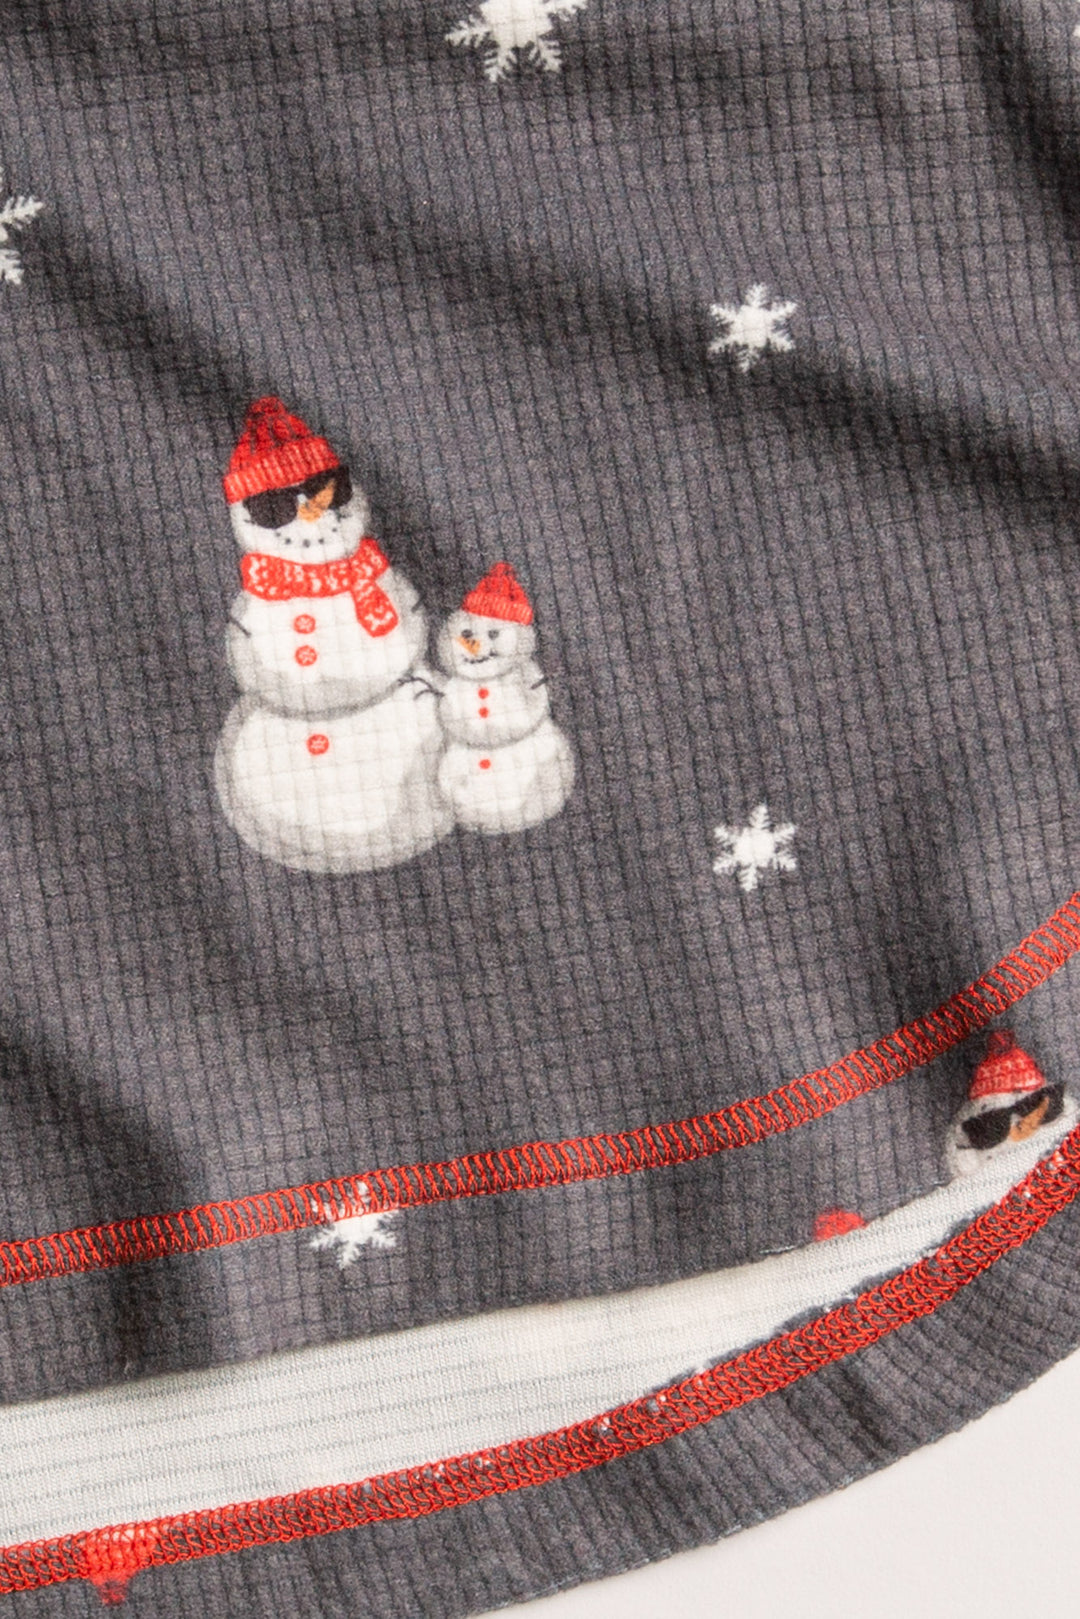 Infant pajama in grey thermal velour with festive snowman print. Red & white striped cuffs. (7257679626340)